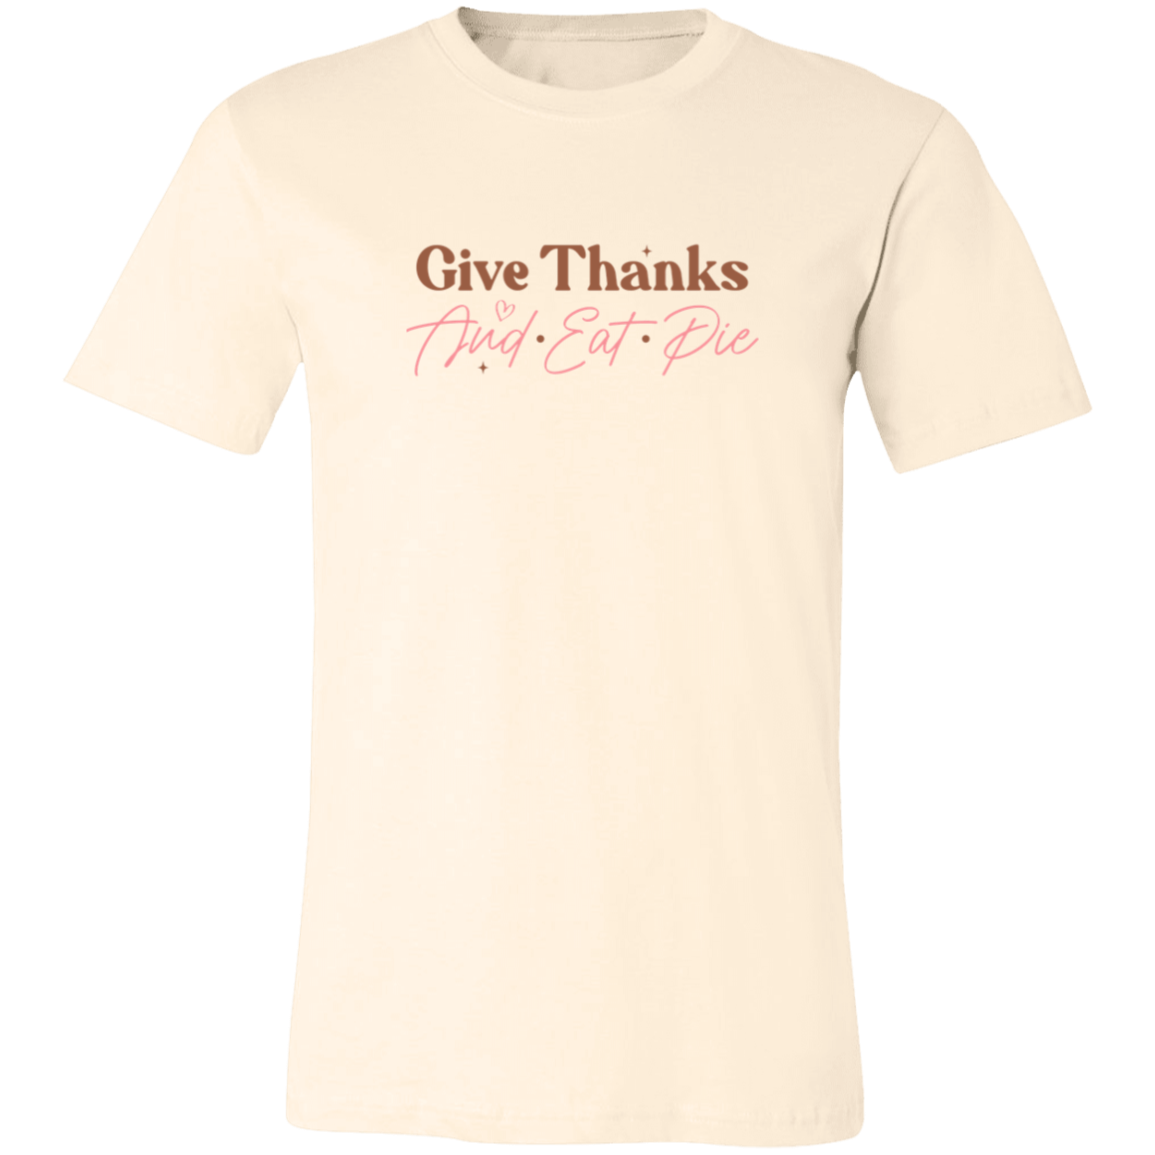 Give Thanks and Eat Pie Shirt